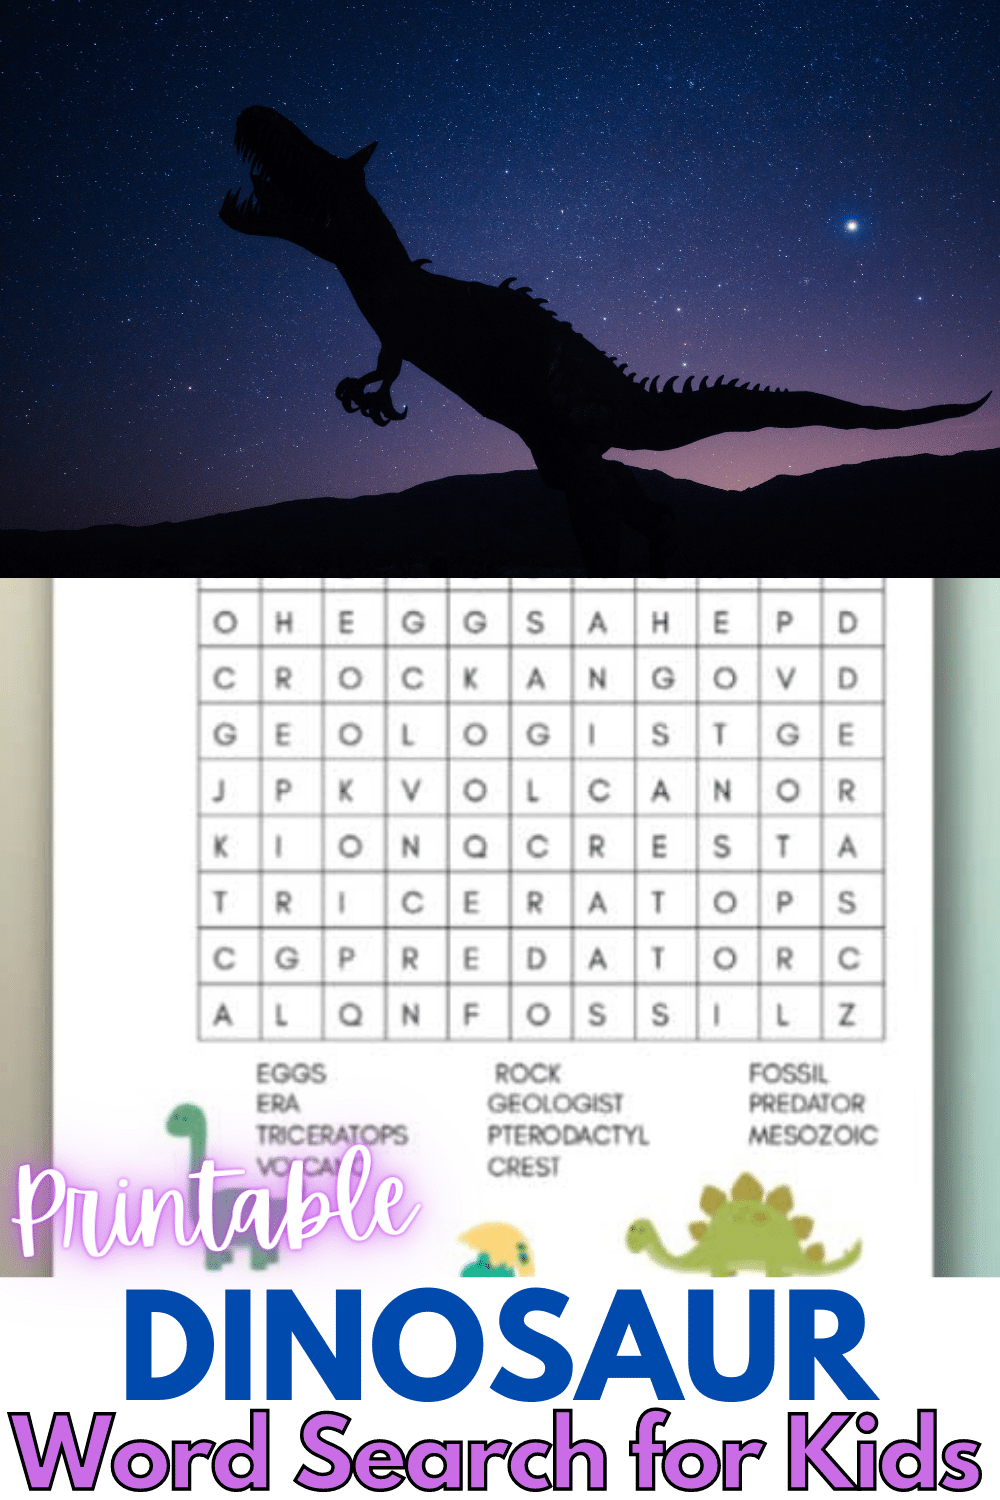 top image is a dinosaur outside at night and bottom image is a Printable Dinosaur Word Search for Kids